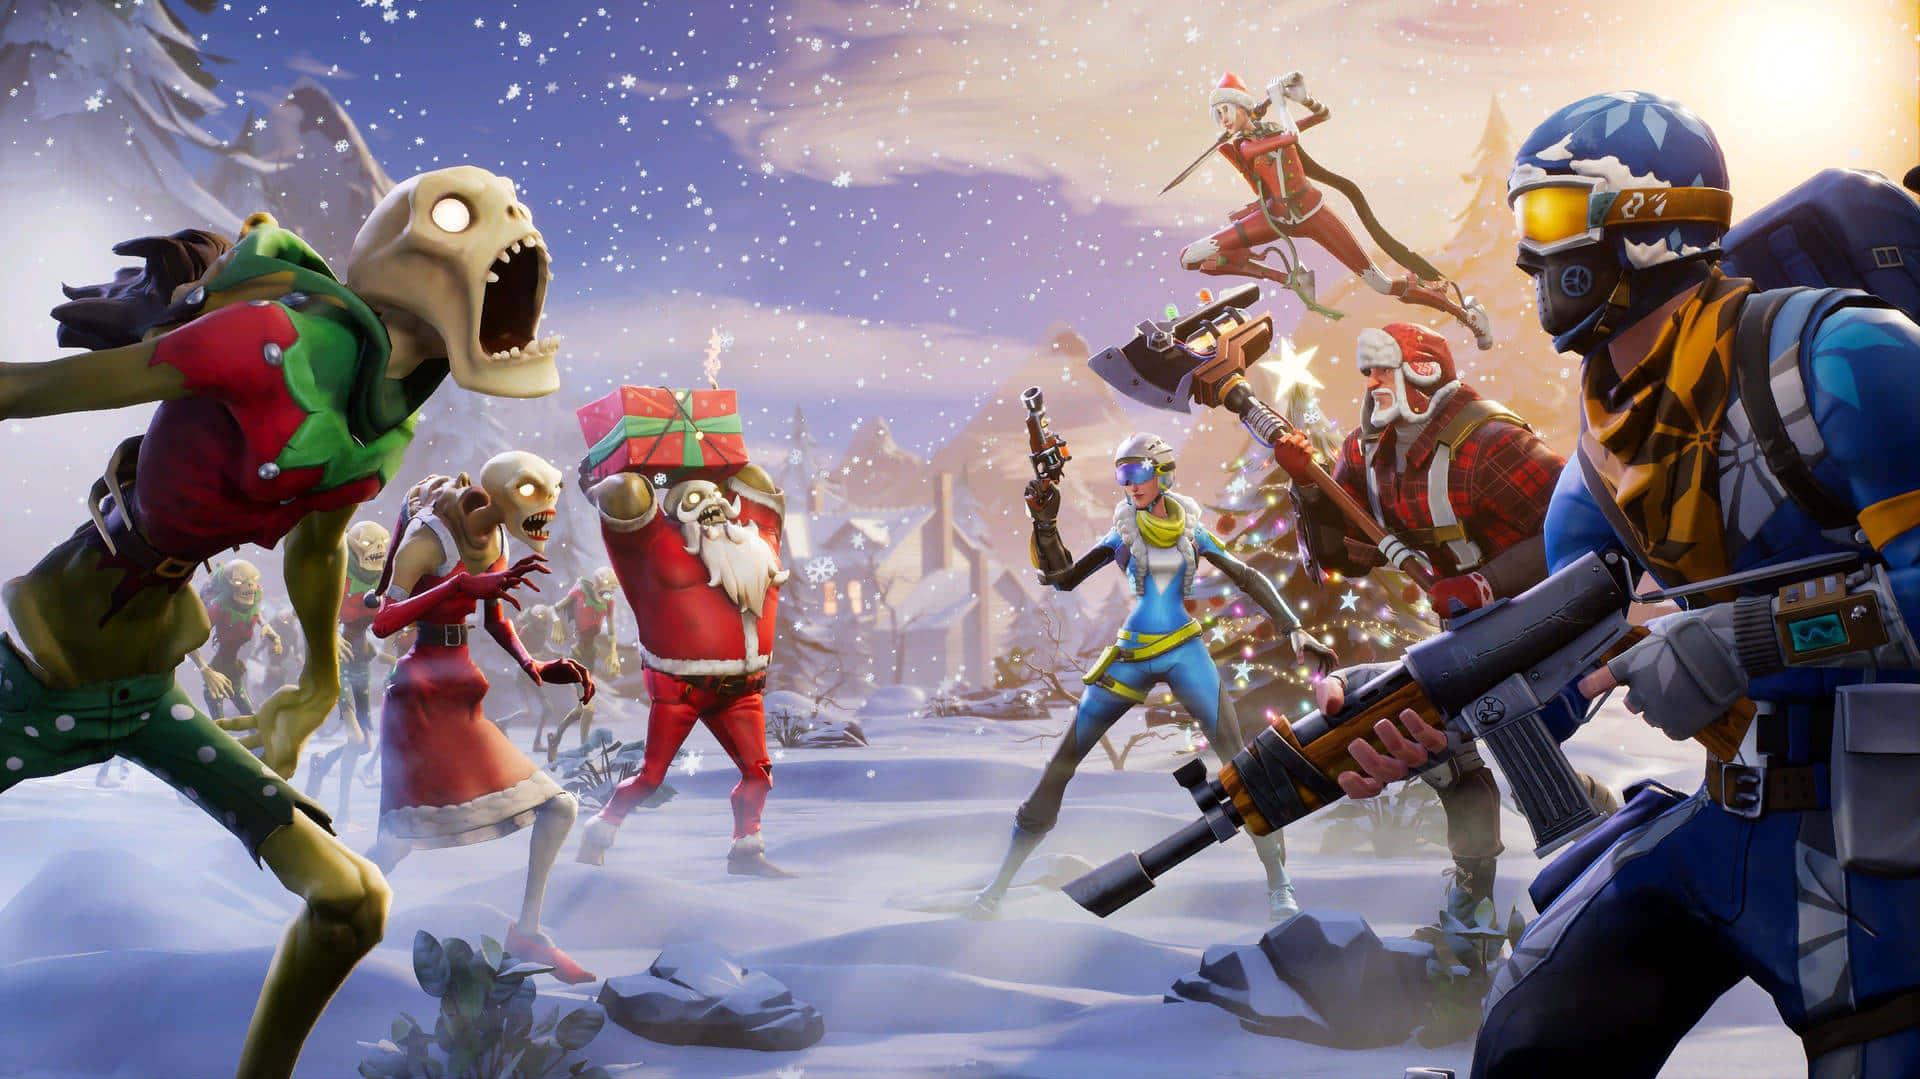 Fortnite A Zombie Battle In The Snow Wallpaper